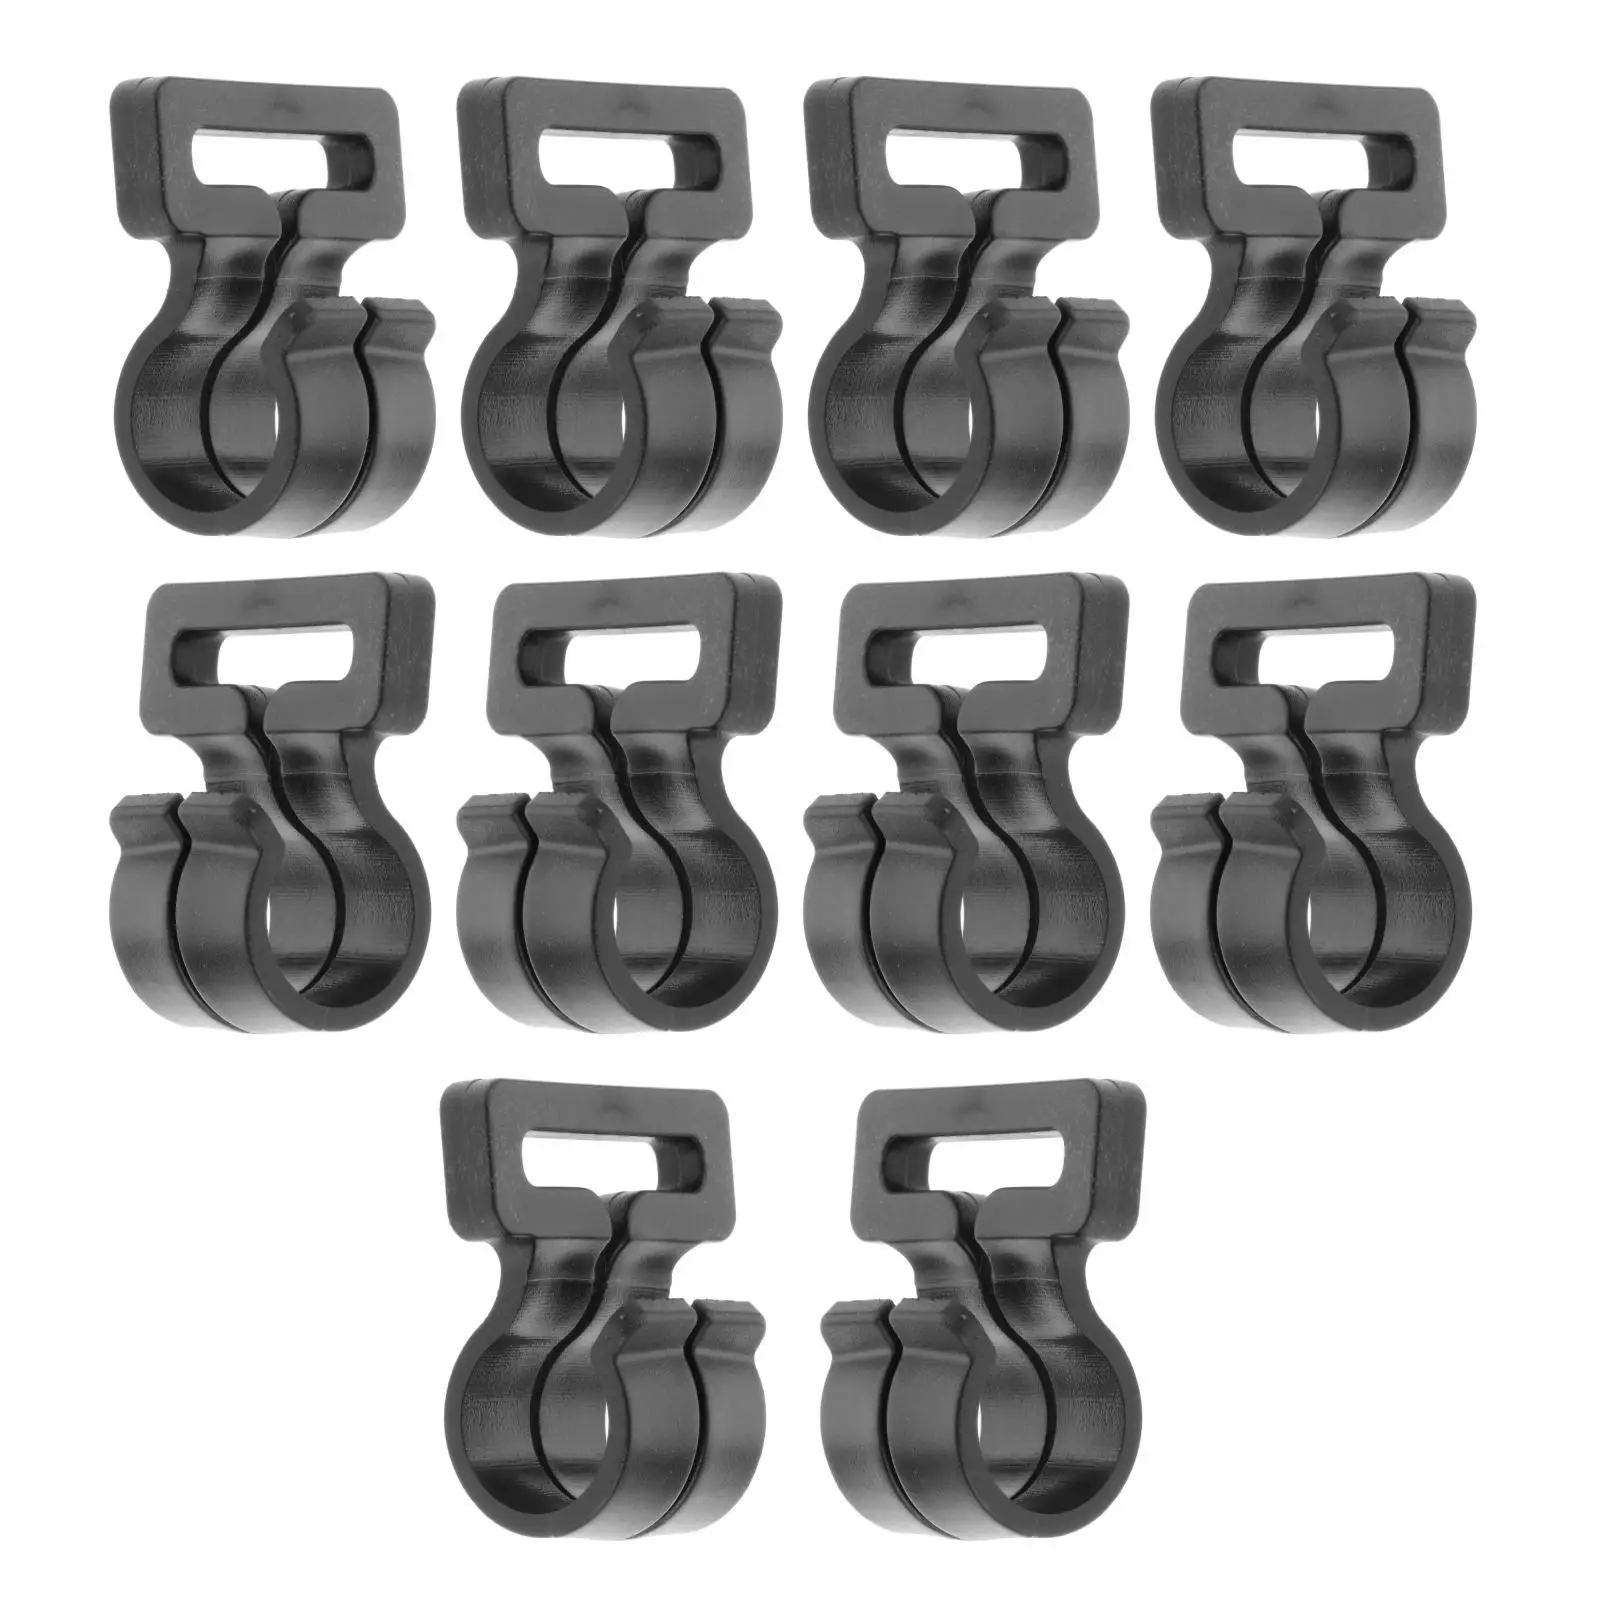 10 Pieces Camping Tent Pole Hook Awning Hooks Clips Tent Set